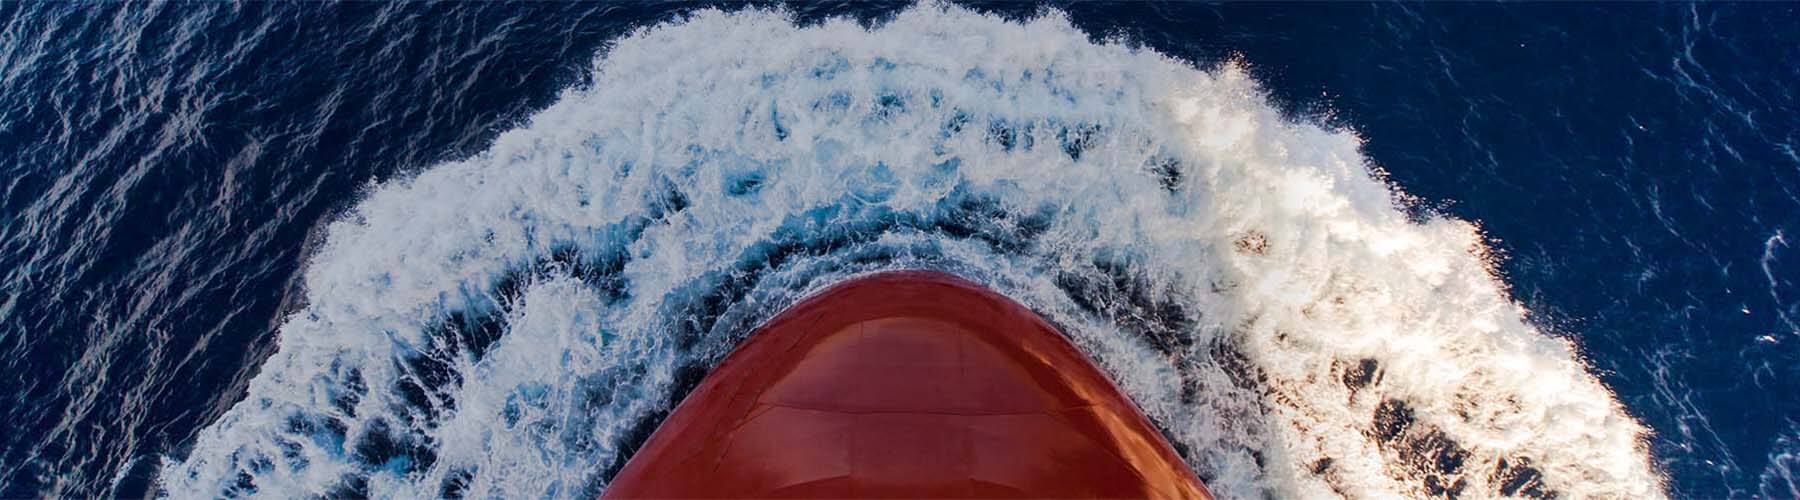 The stern of a shipping vessel, creating a wake as it moves through the ocean.